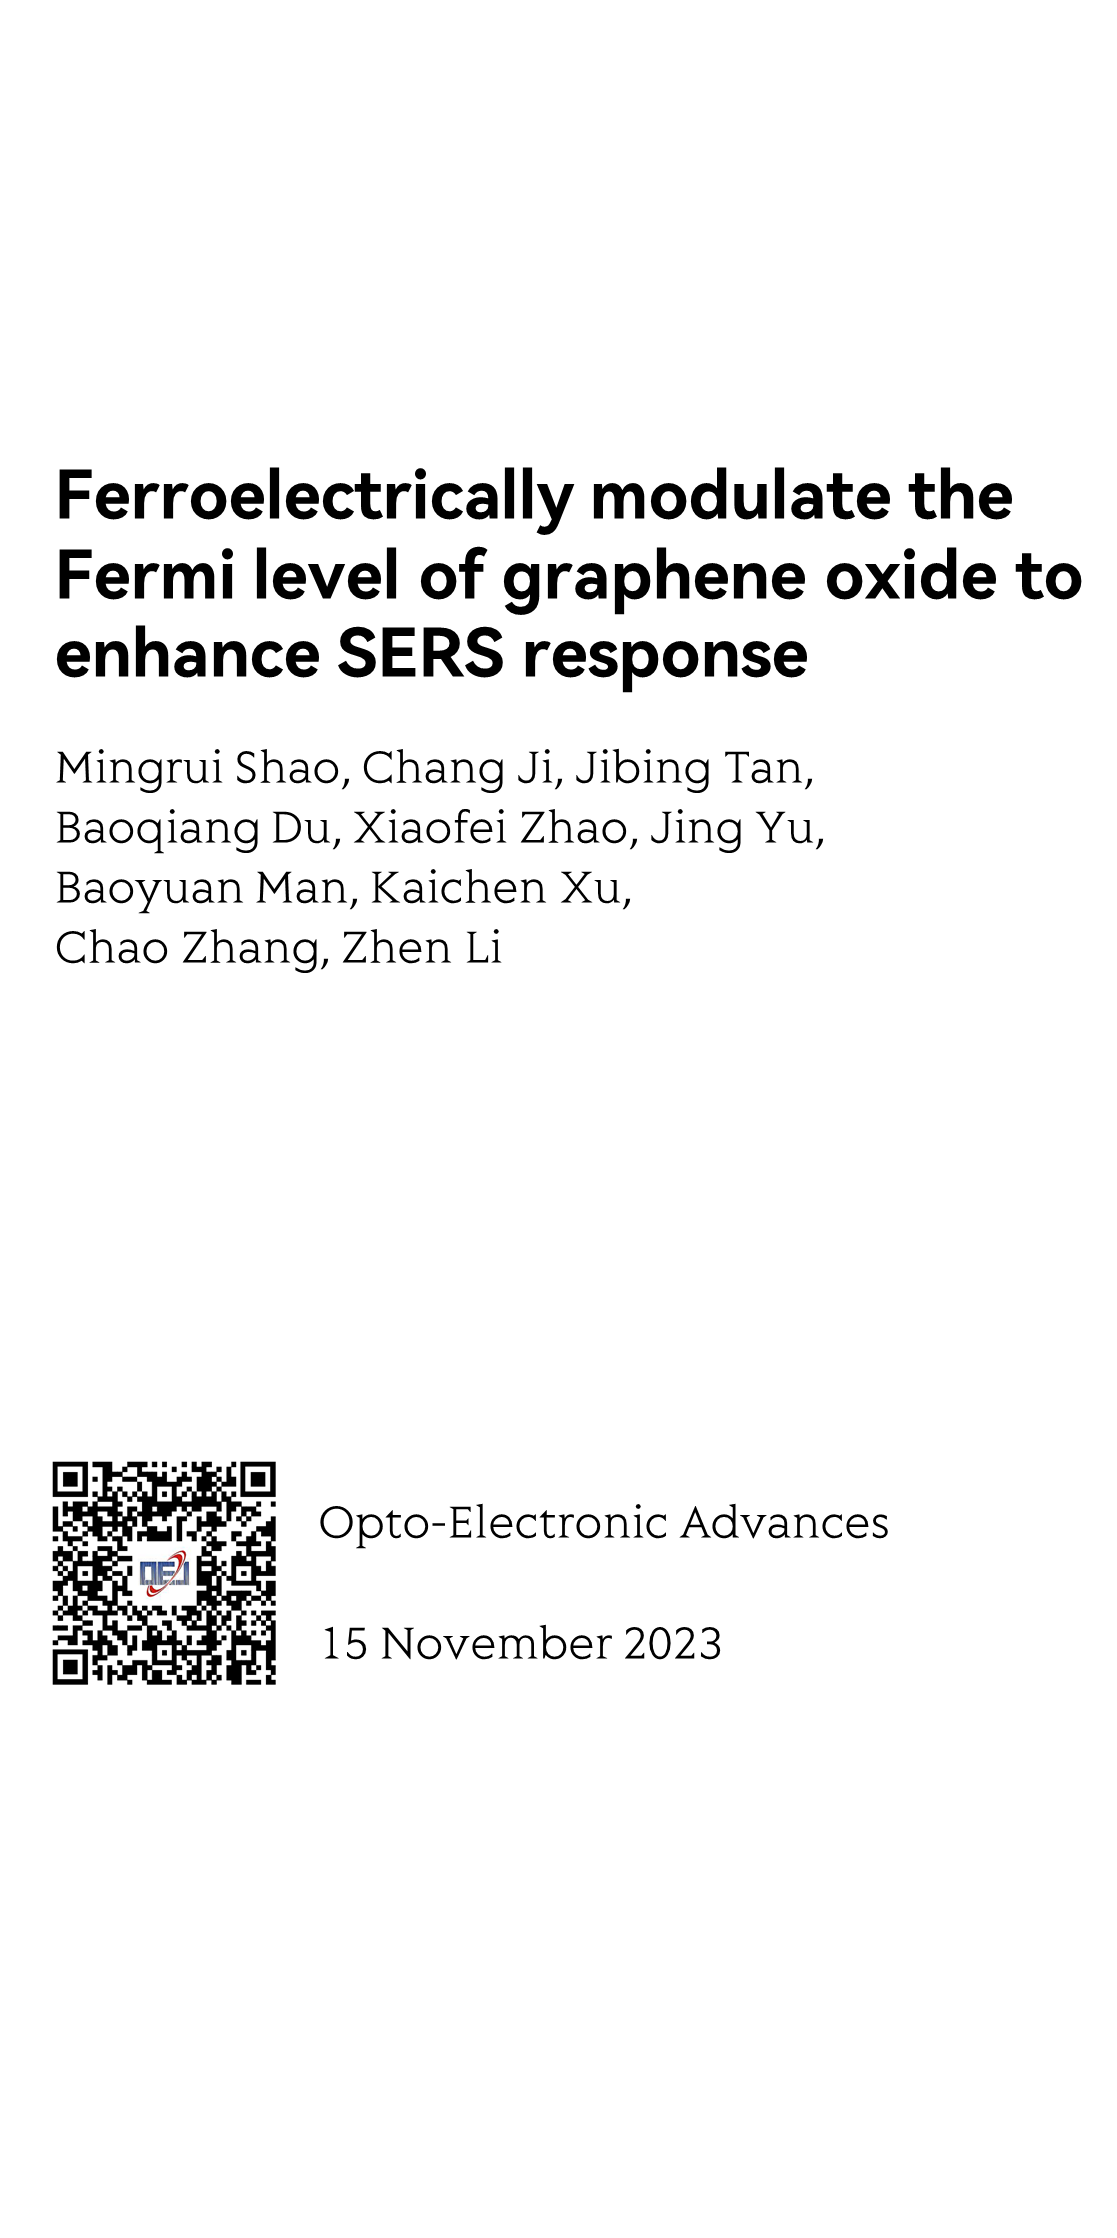 Ferroelectrically modulate the Fermi level of graphene oxide to enhance SERS response_1